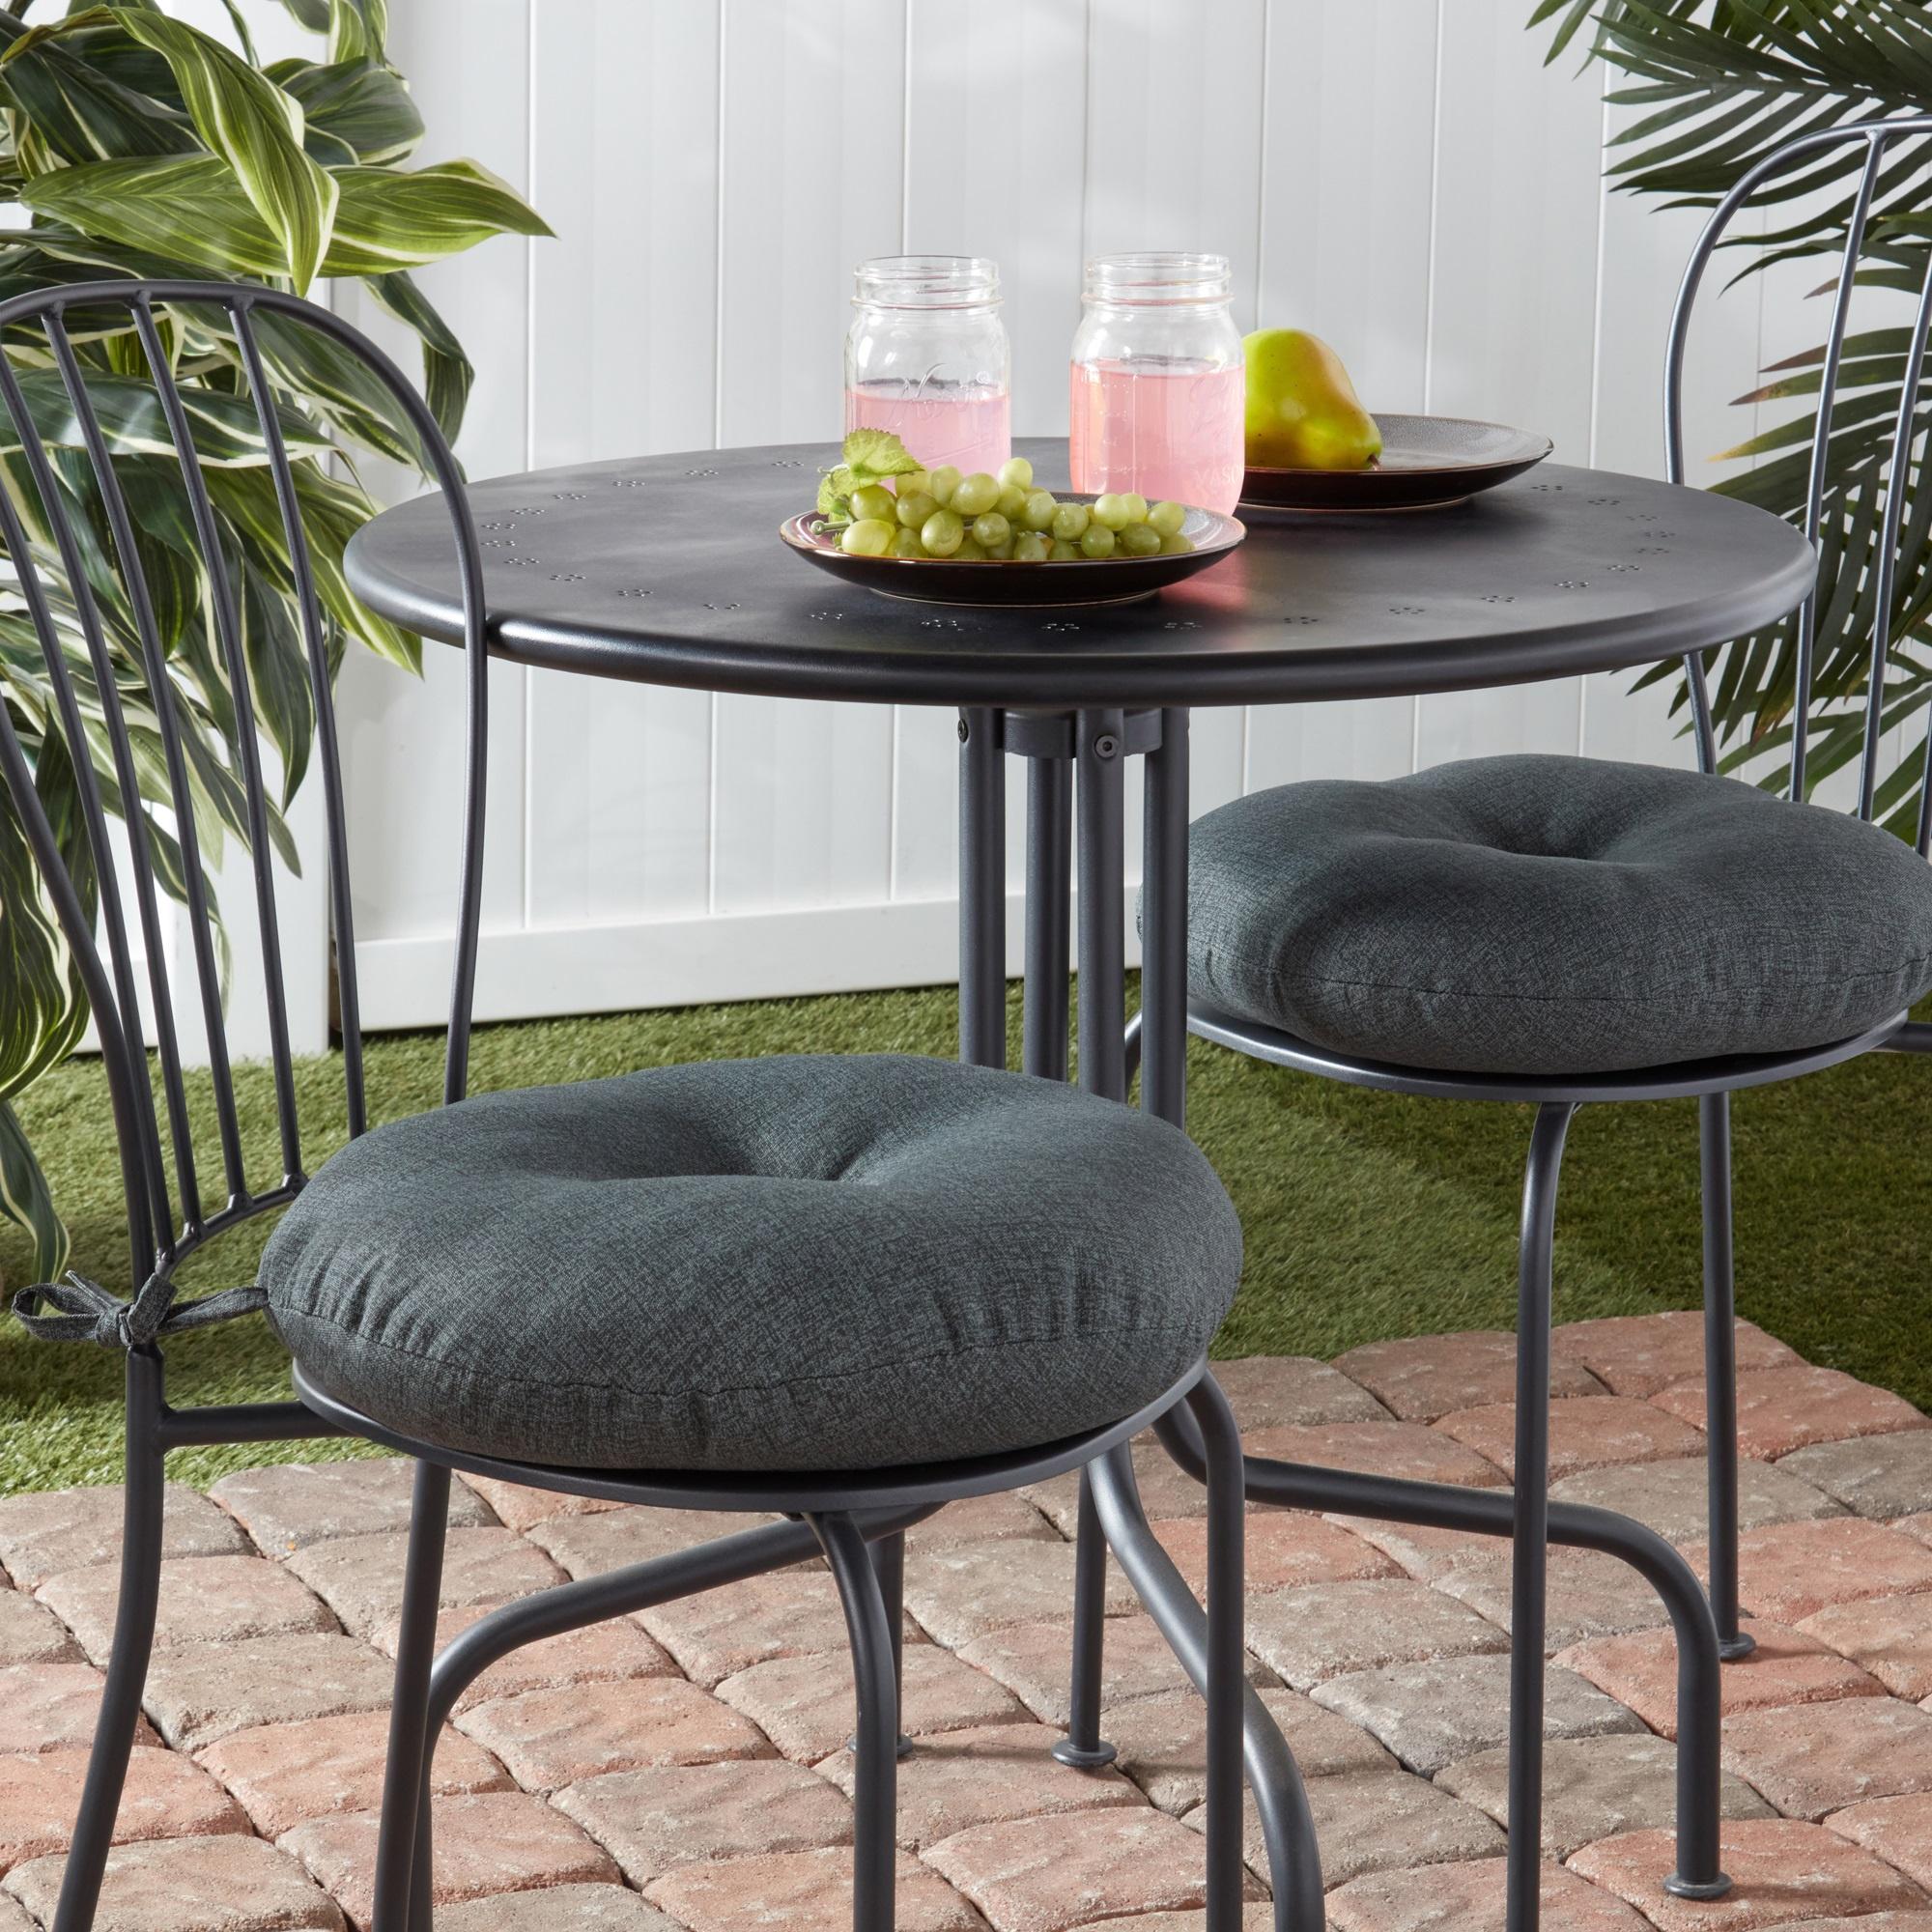 Greendale Home Fashions Carbon 15 in. Round Outdoor Reversible Bistro Seat Cushion (Set of 2) - image 2 of 6